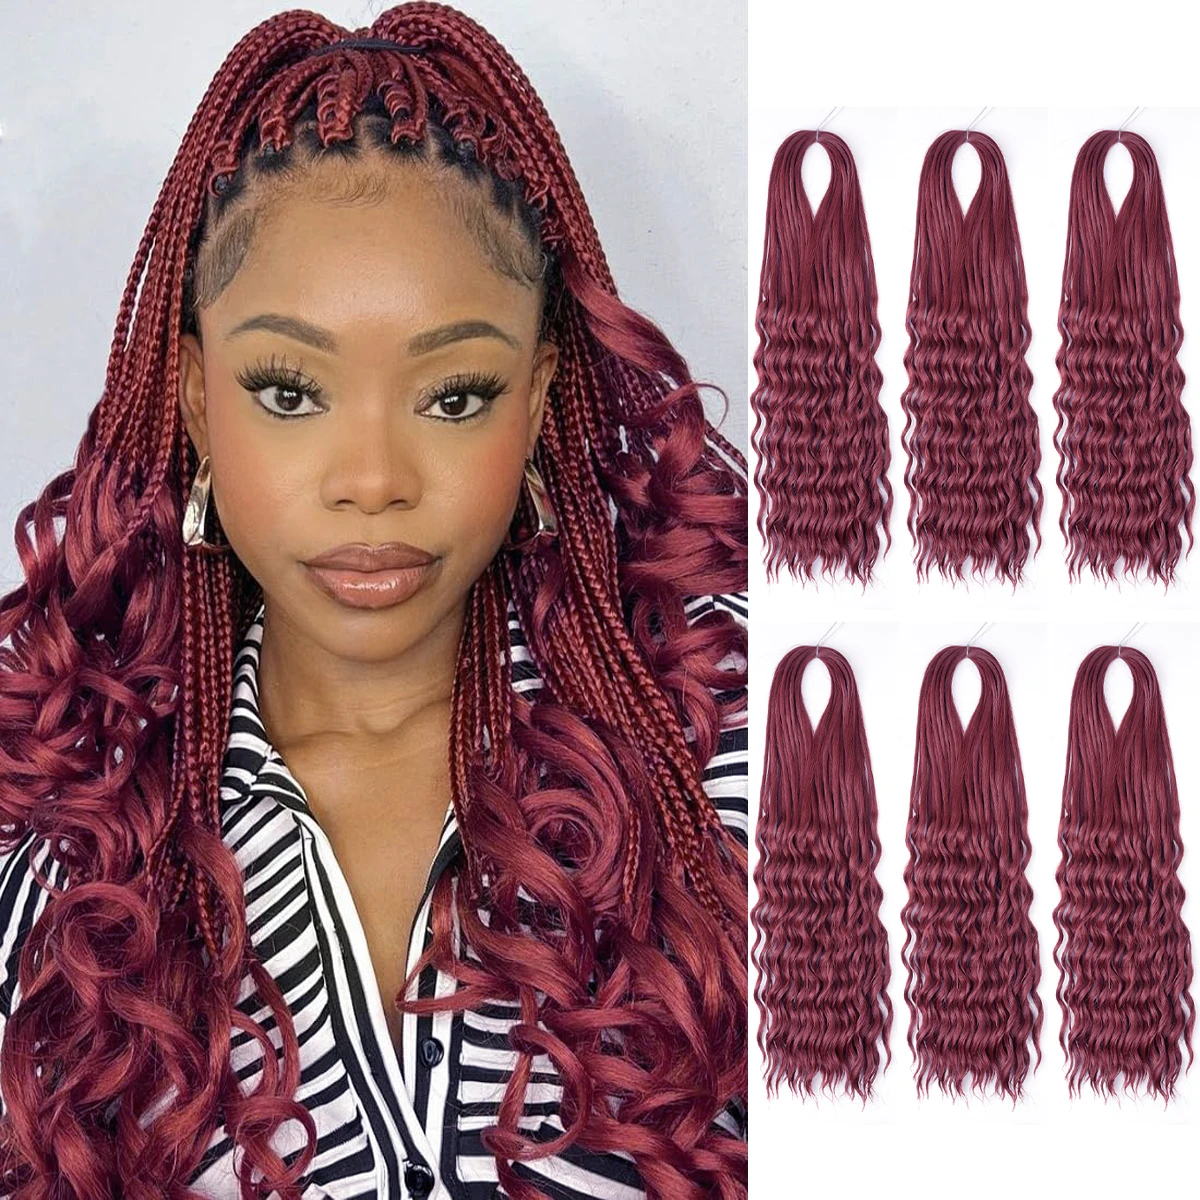 

20inch Synthetic Water Wave Crochet Hair Extensions Luna Curl Hair Loose Deep Ocean Wave Ombre Braiding Hair For Women Blonde